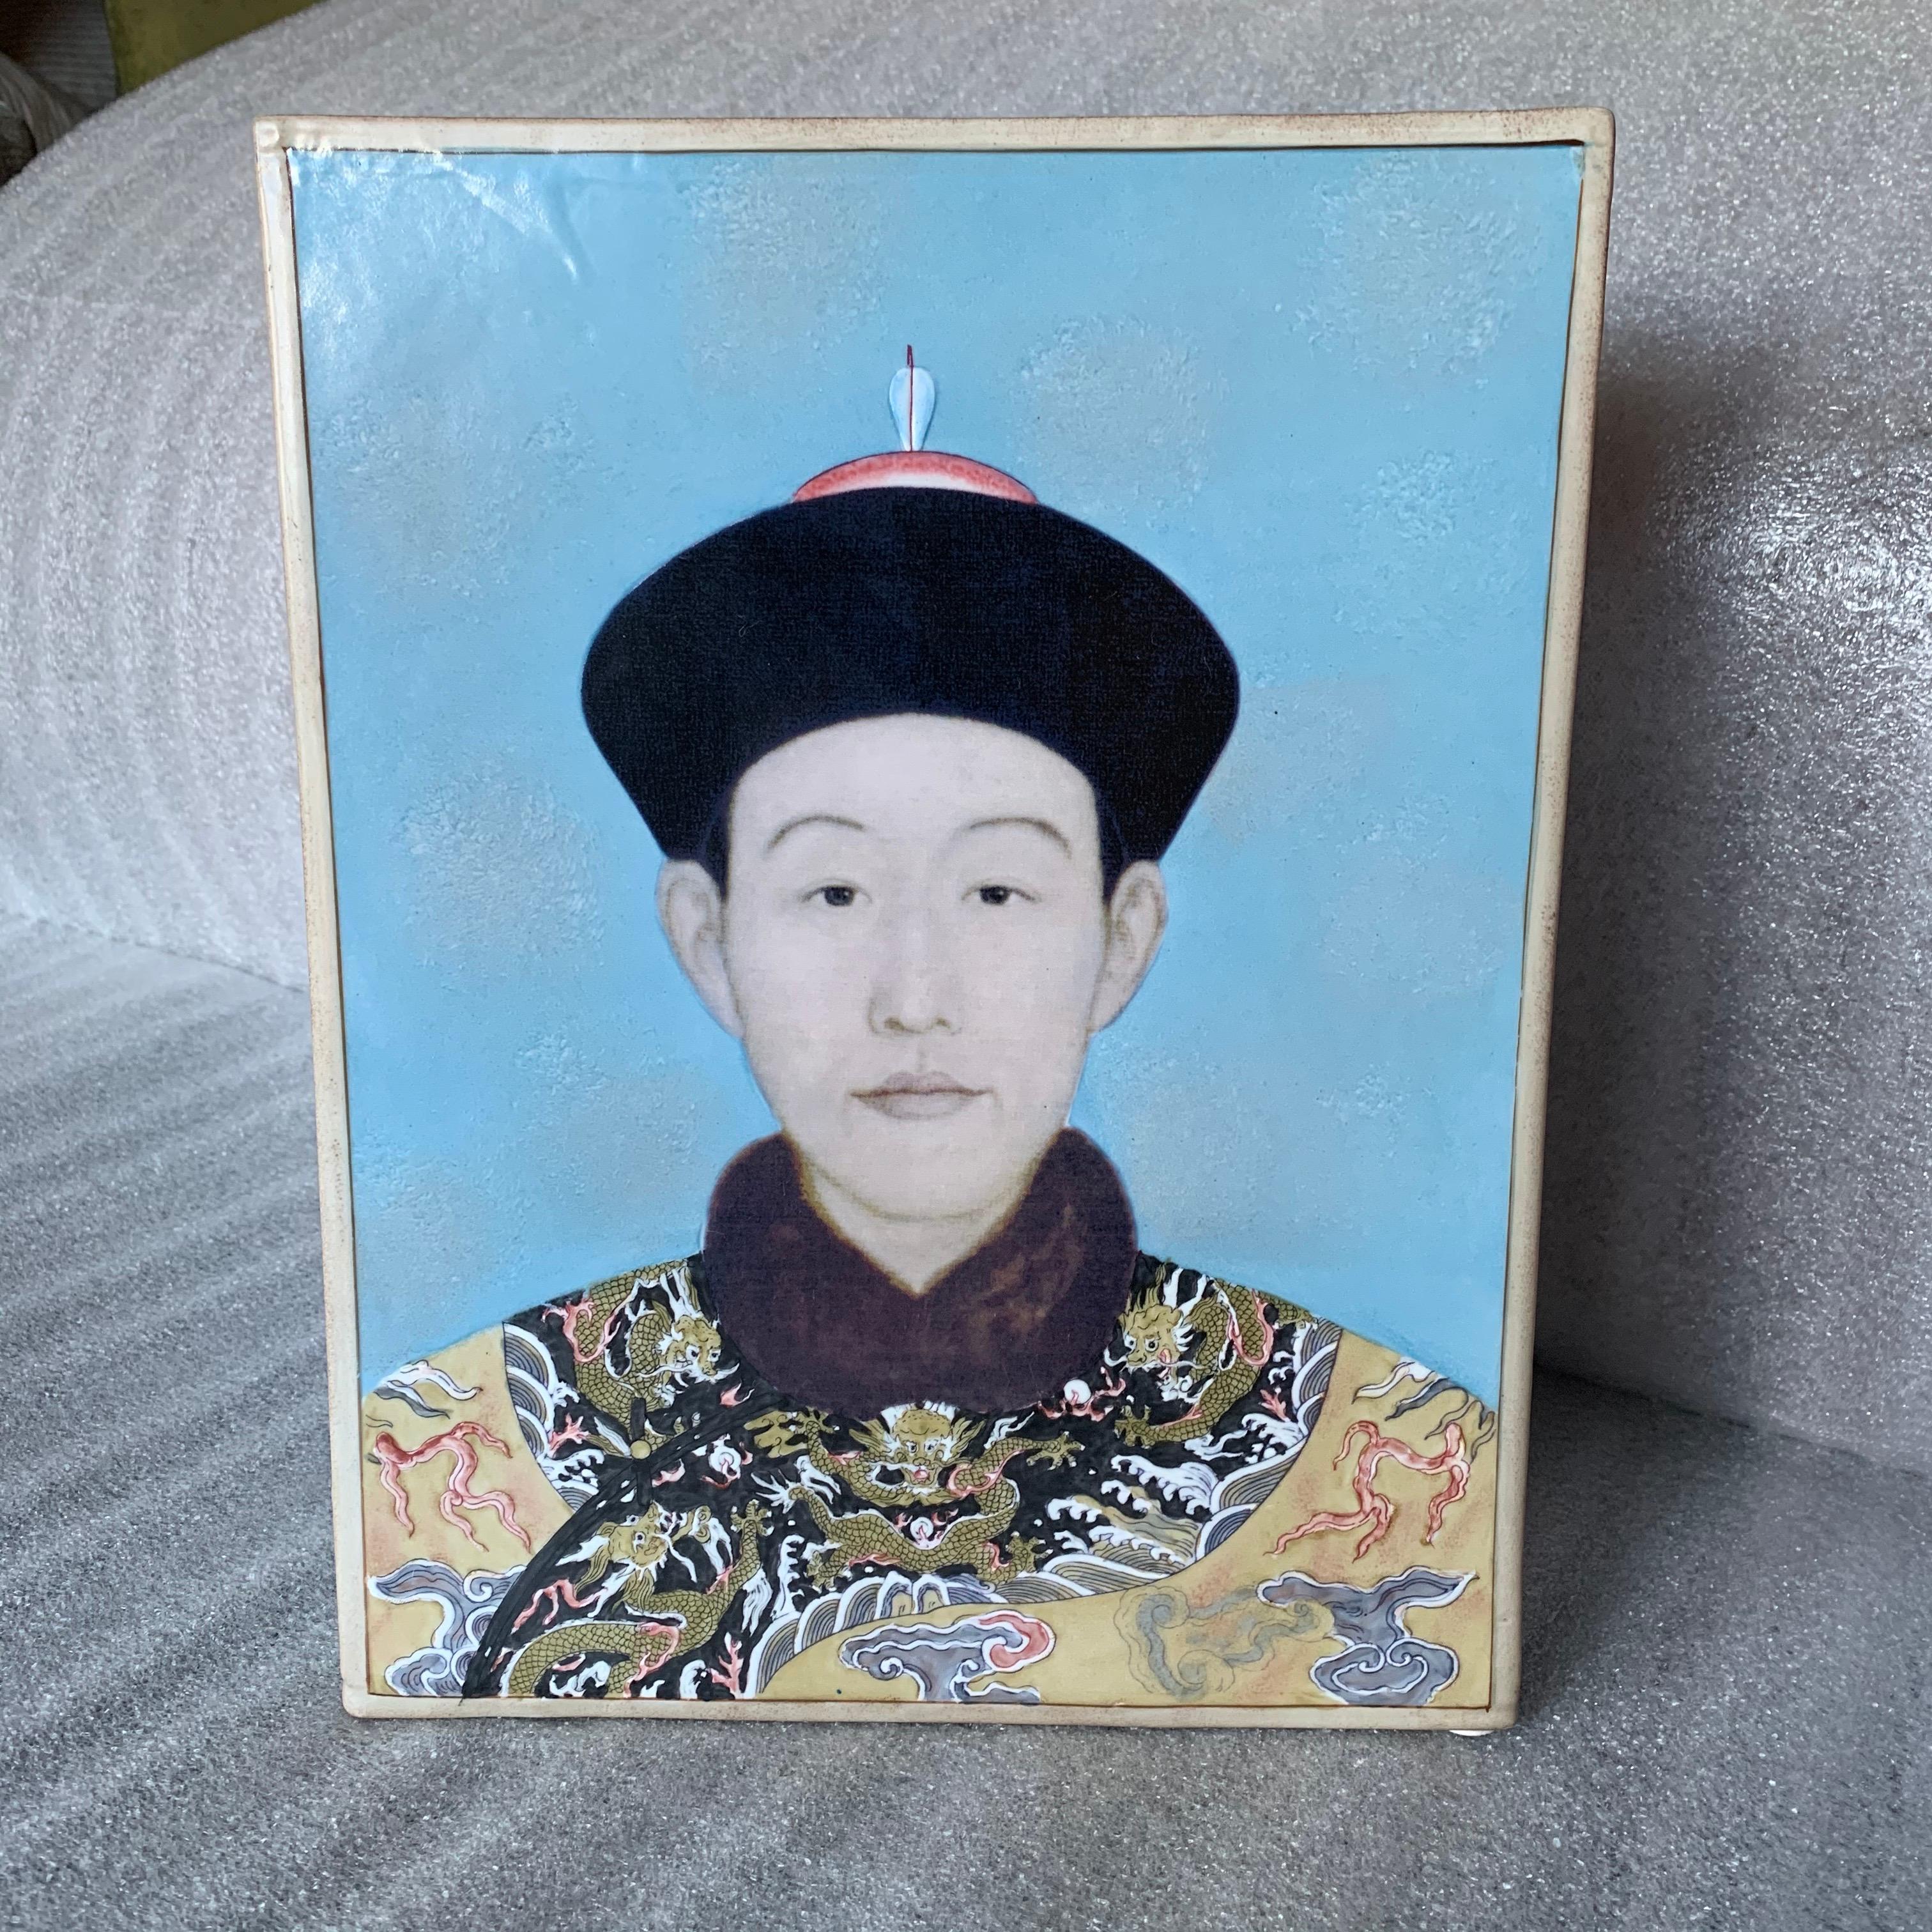 Impressive glazed ceramic vase signed by Fabienne Jouvin on the bottom. This is a beautiful portraiture of the Last Chinese Emperor. The colors are vivid and this ceramic vase is very heavy and divided in three sections.
An accomplished artist and